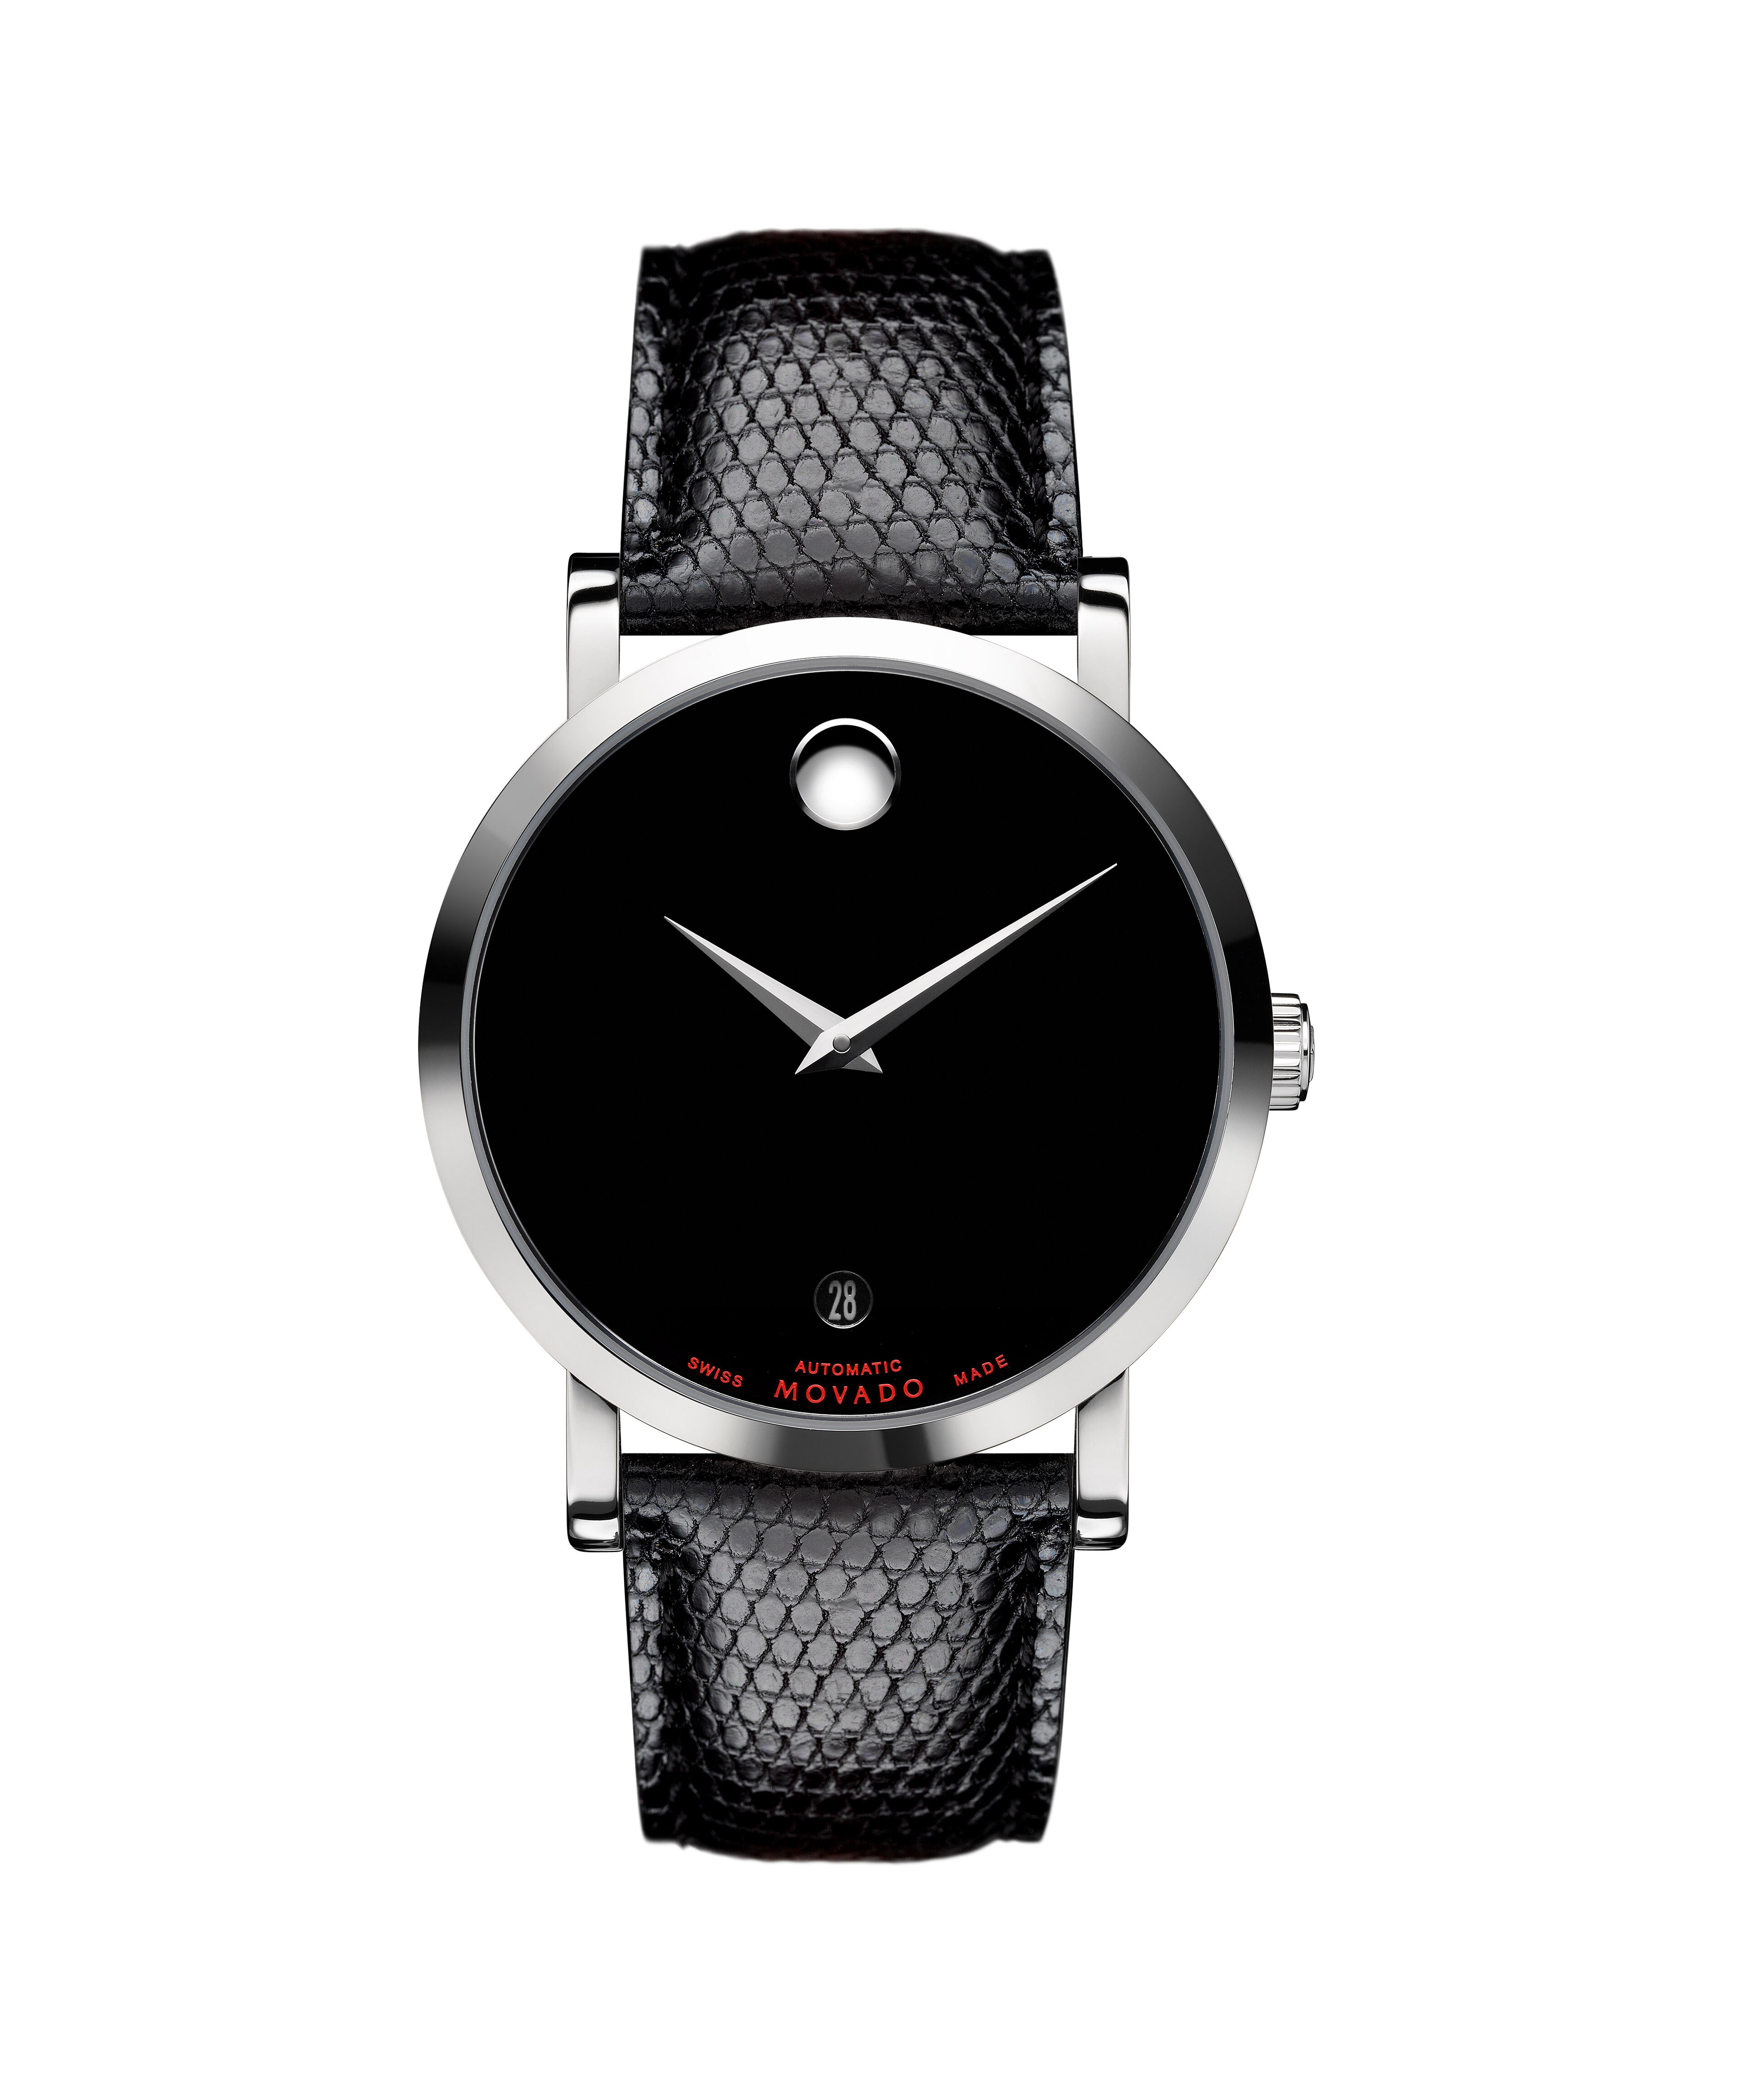 How To Tell Real Or Fake Bvlgari Mens Watch